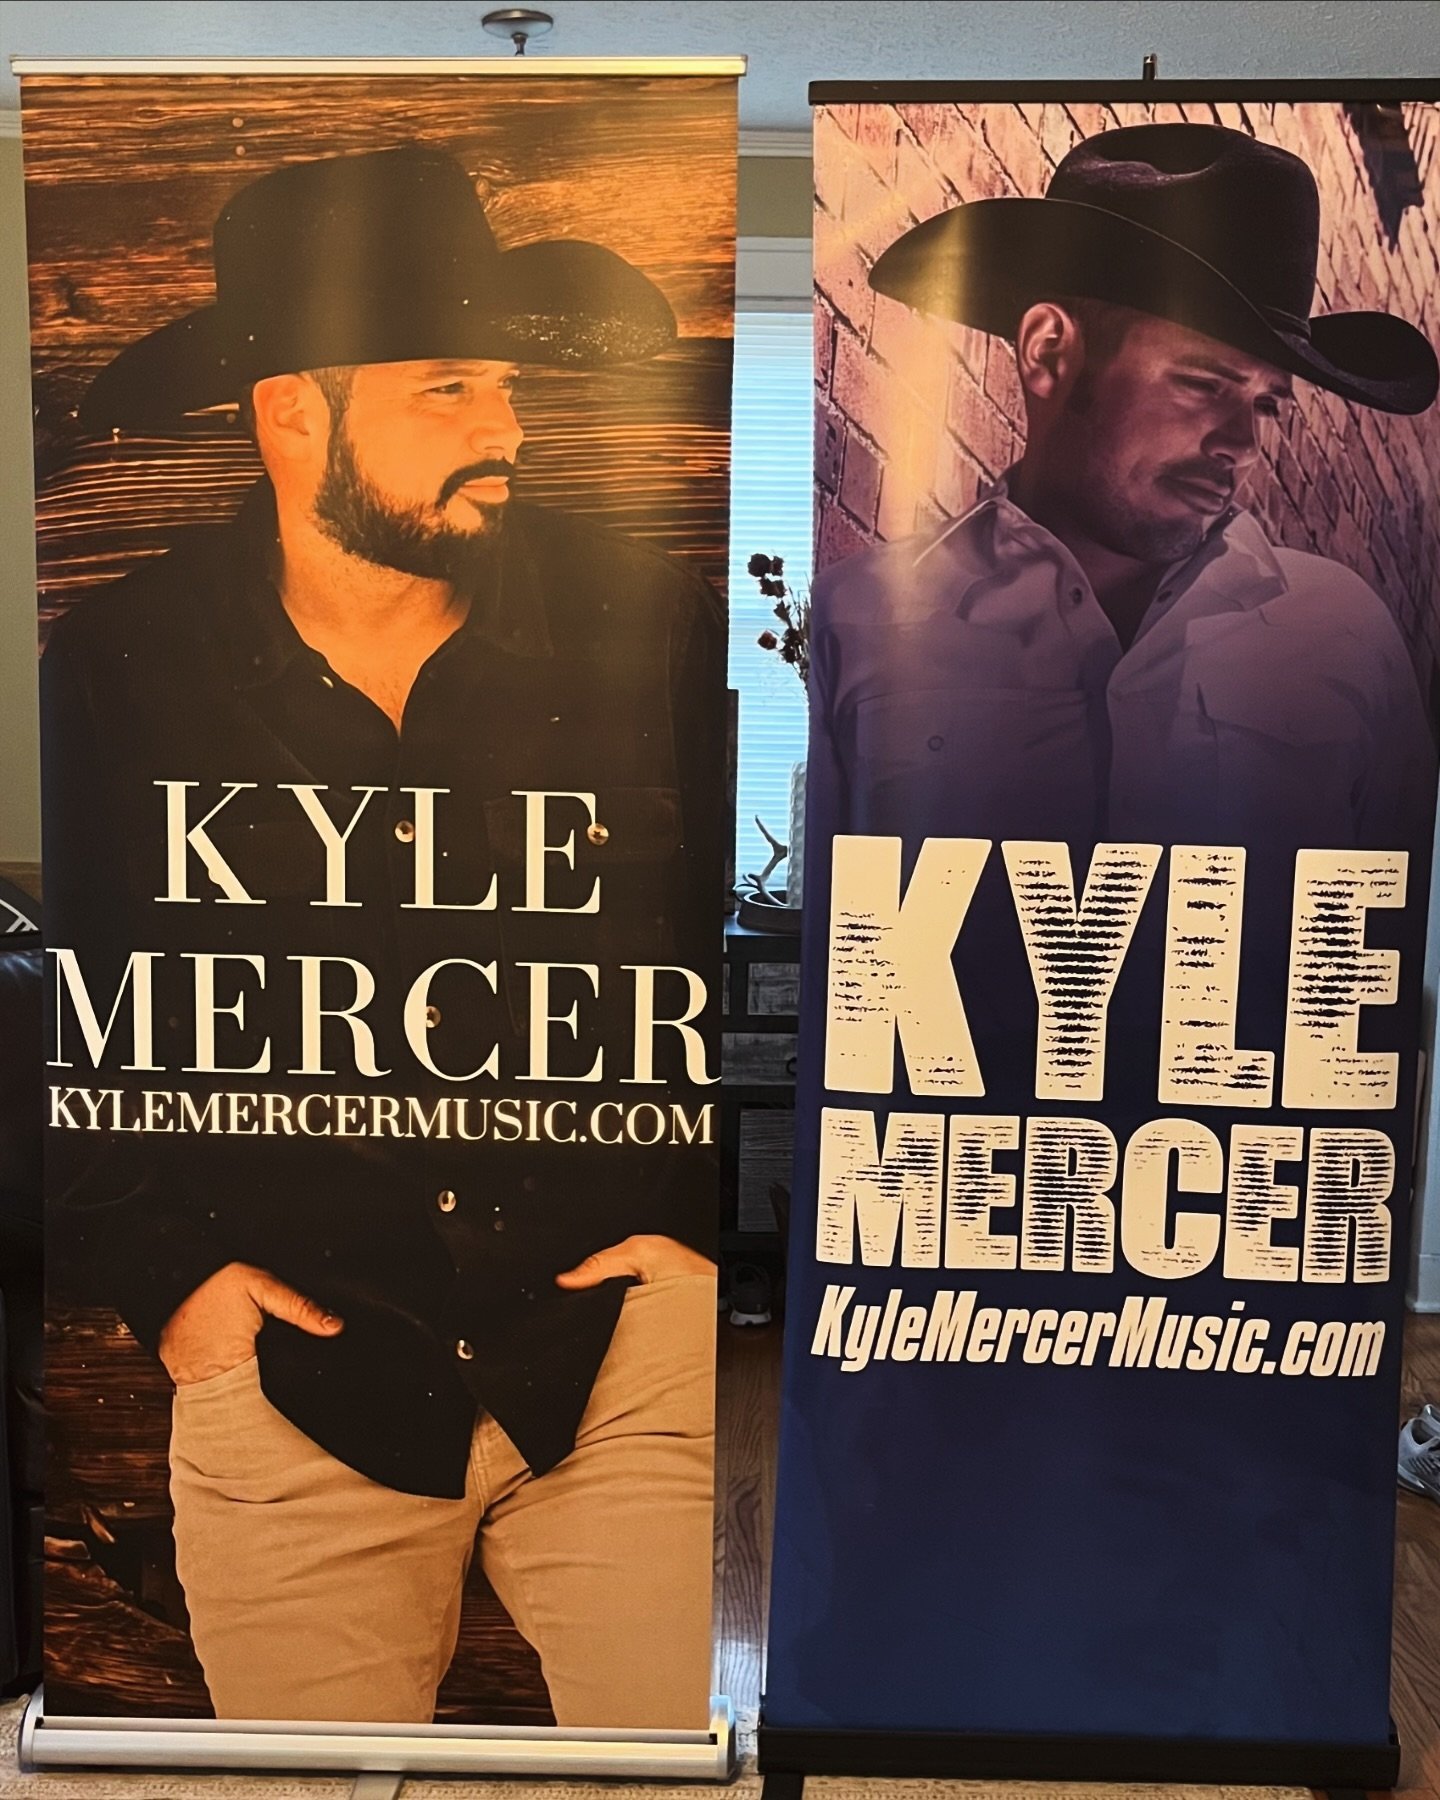 I guess I&rsquo;m starting a collection 🤠
⬇️⬇️⬇️
You can stream my new album &ldquo;Hard Workin&rsquo; Man&rdquo; on all music platforms🎶 OR order your OWN physical autographed copy on my website🤘
#banners #kylemercermusic #countrymusic #newmusic 